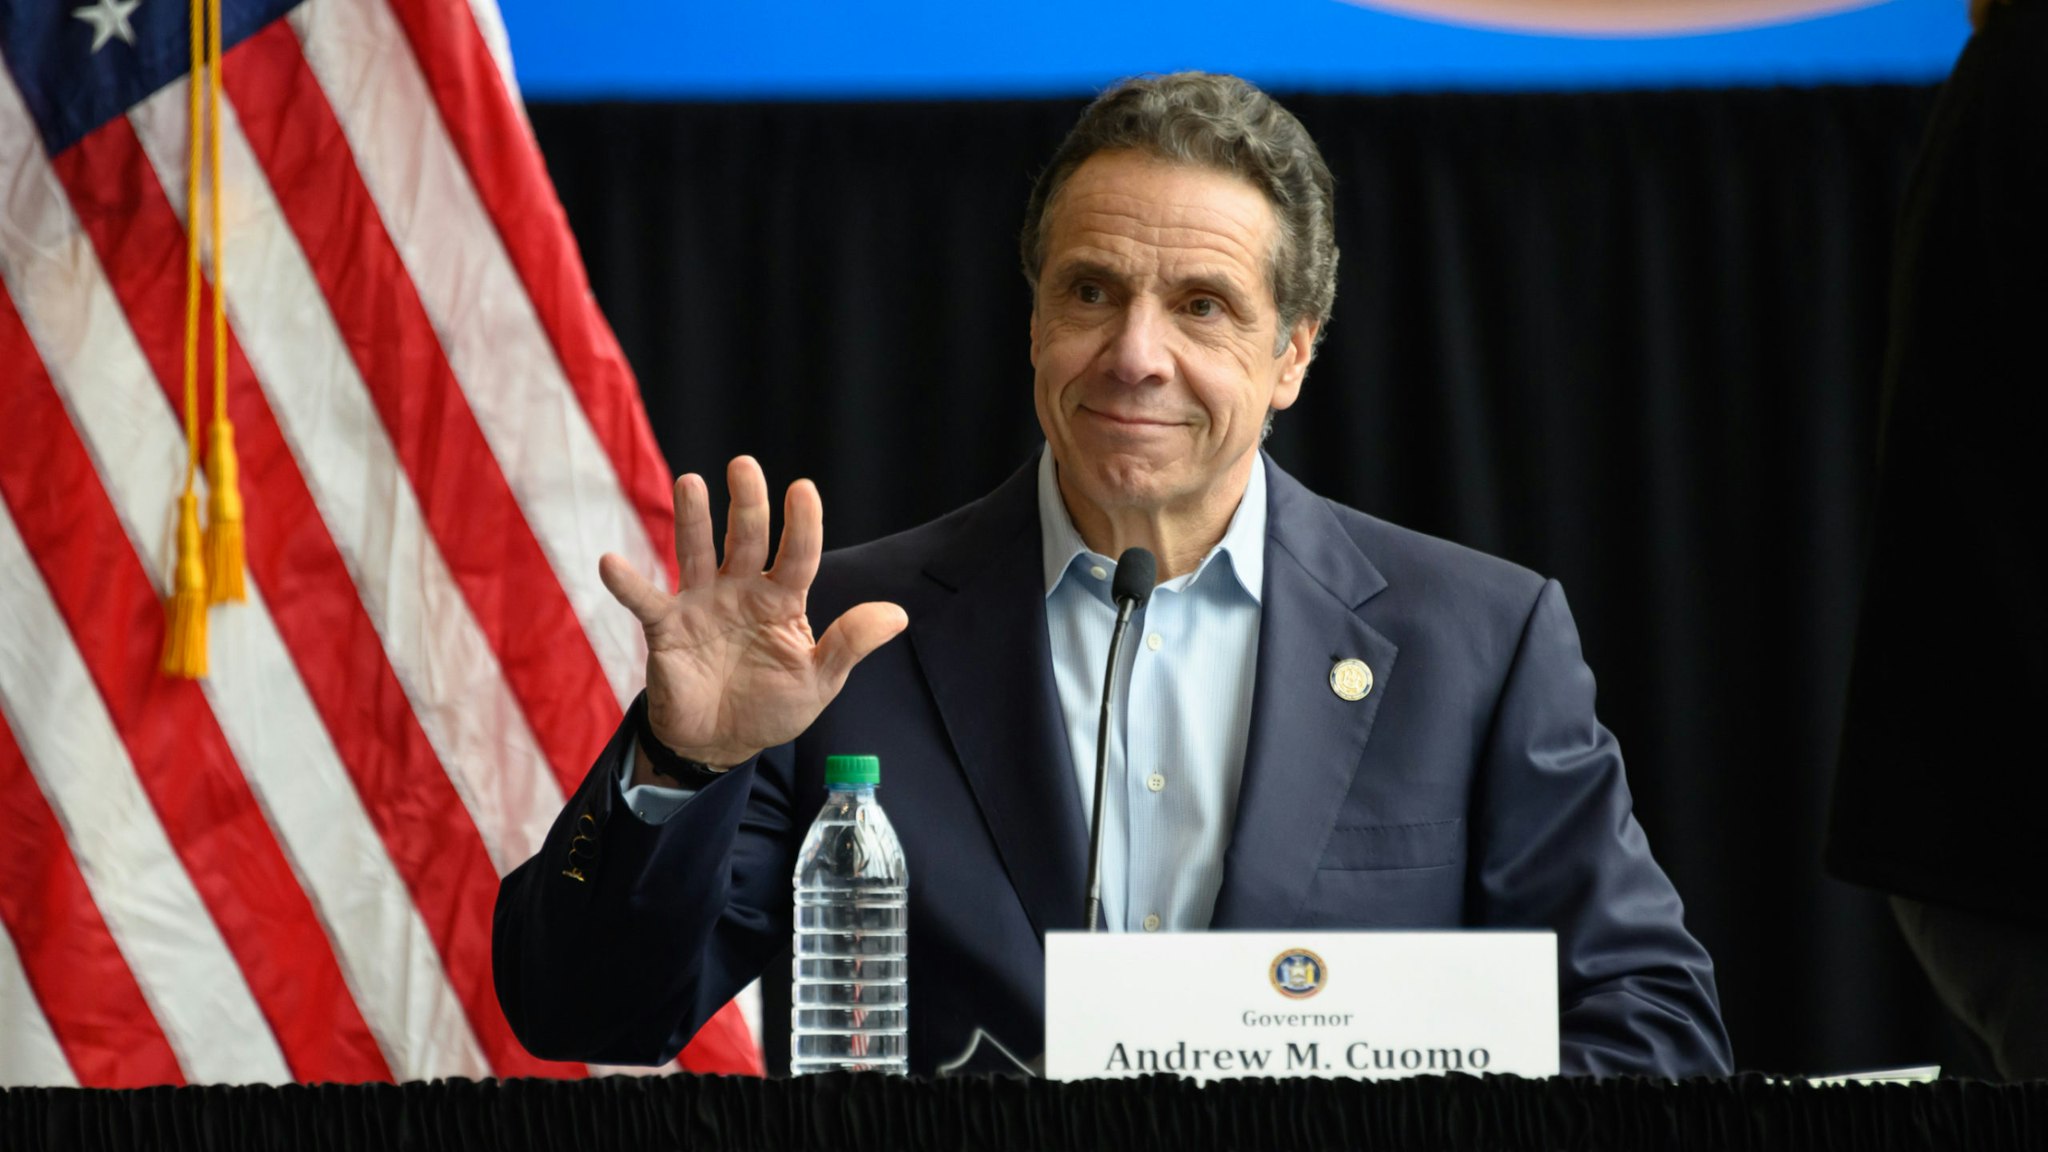 Governor of New York Andrew Cuomo speaks during a news conference at the Jacob Javits Convention Center during the Coronavirus pandemic on March 30, 2020 in New York City.